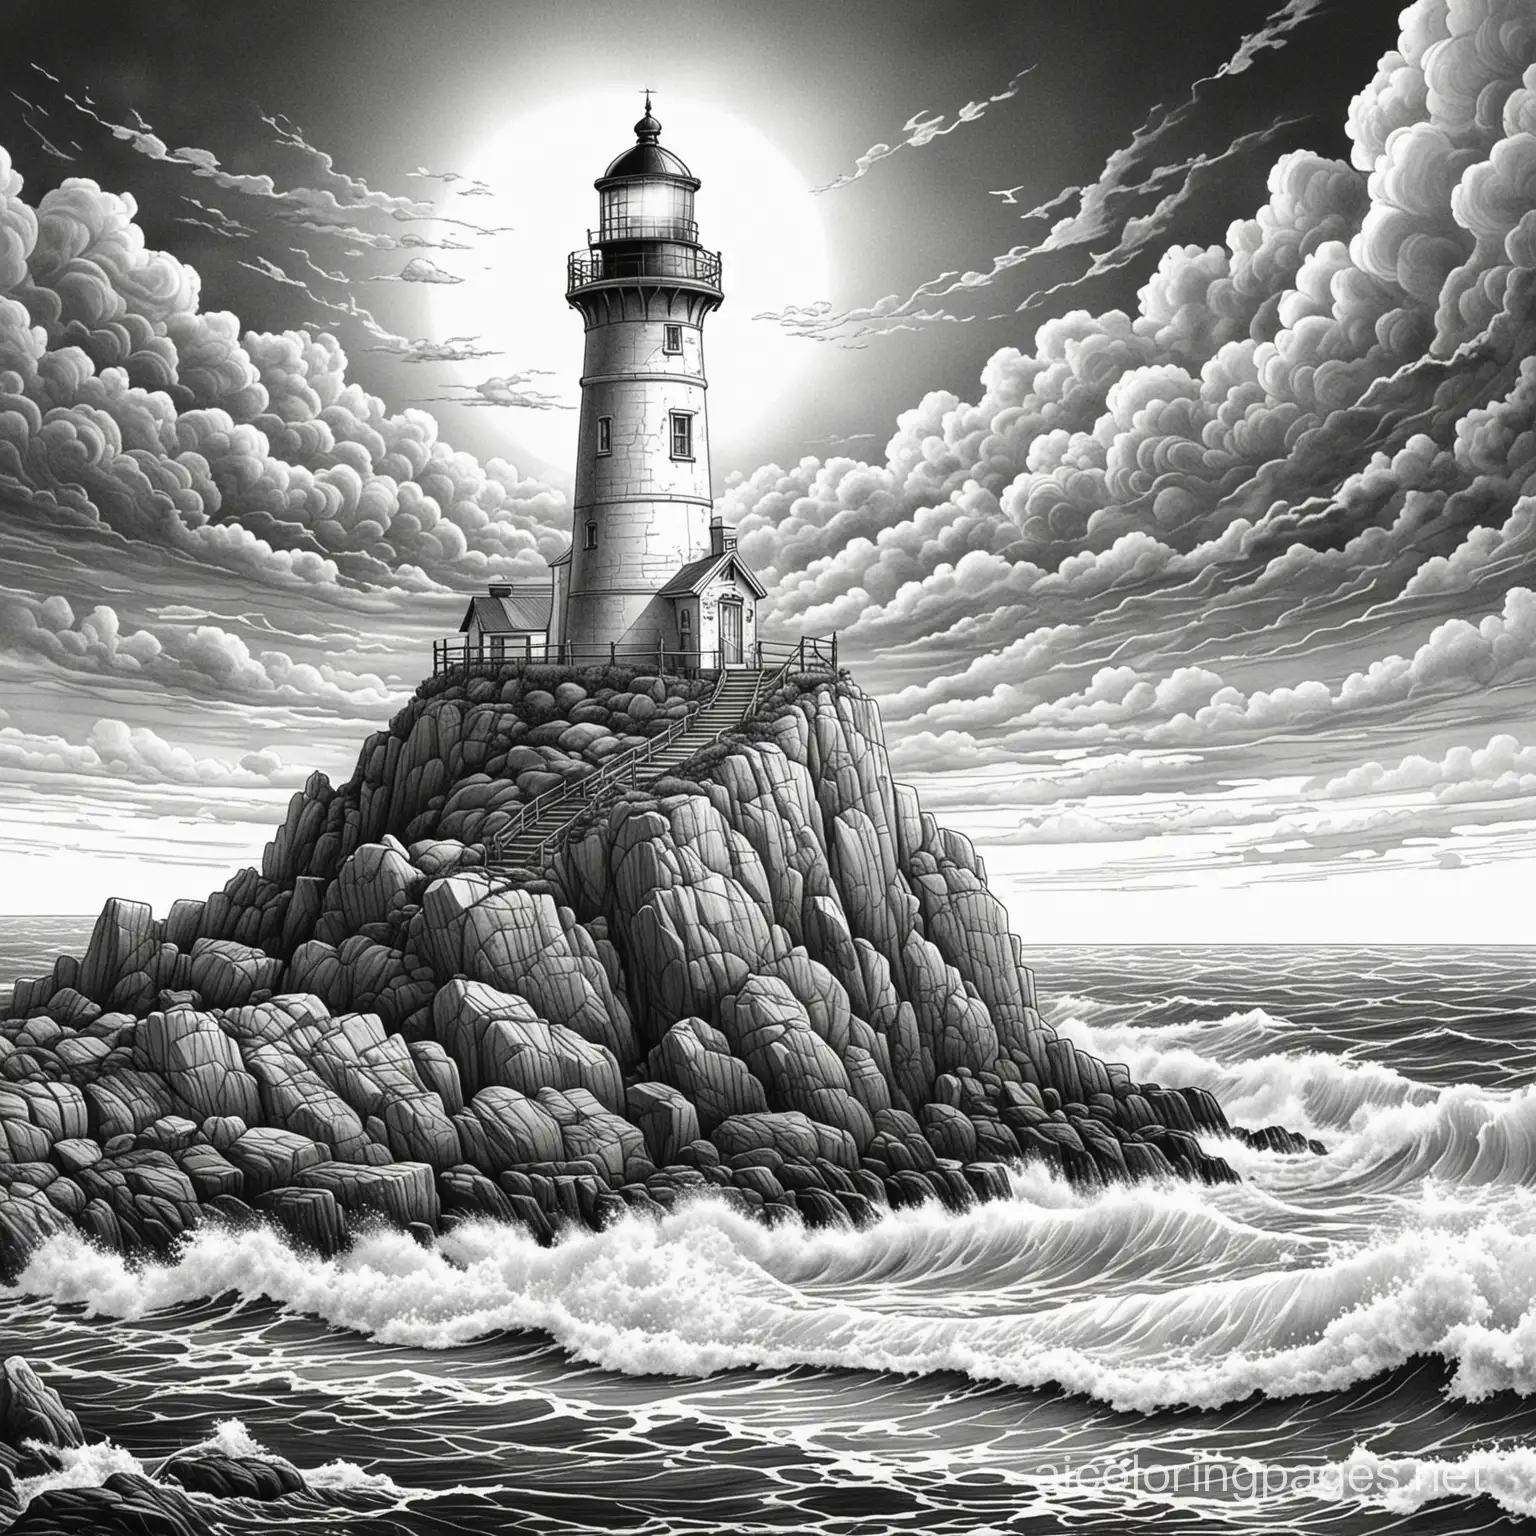 gothic lighthouse a loney lighthouse perched on a rocky cliff, casting its light into the stormy sea, Coloring Page, black and white, line art, white background, Simplicity, Ample White Space. The background of the coloring page is plain white to make it easy for young children to color within the lines. The outlines of all the subjects are easy to distinguish, making it simple for kids to color without too much difficulty